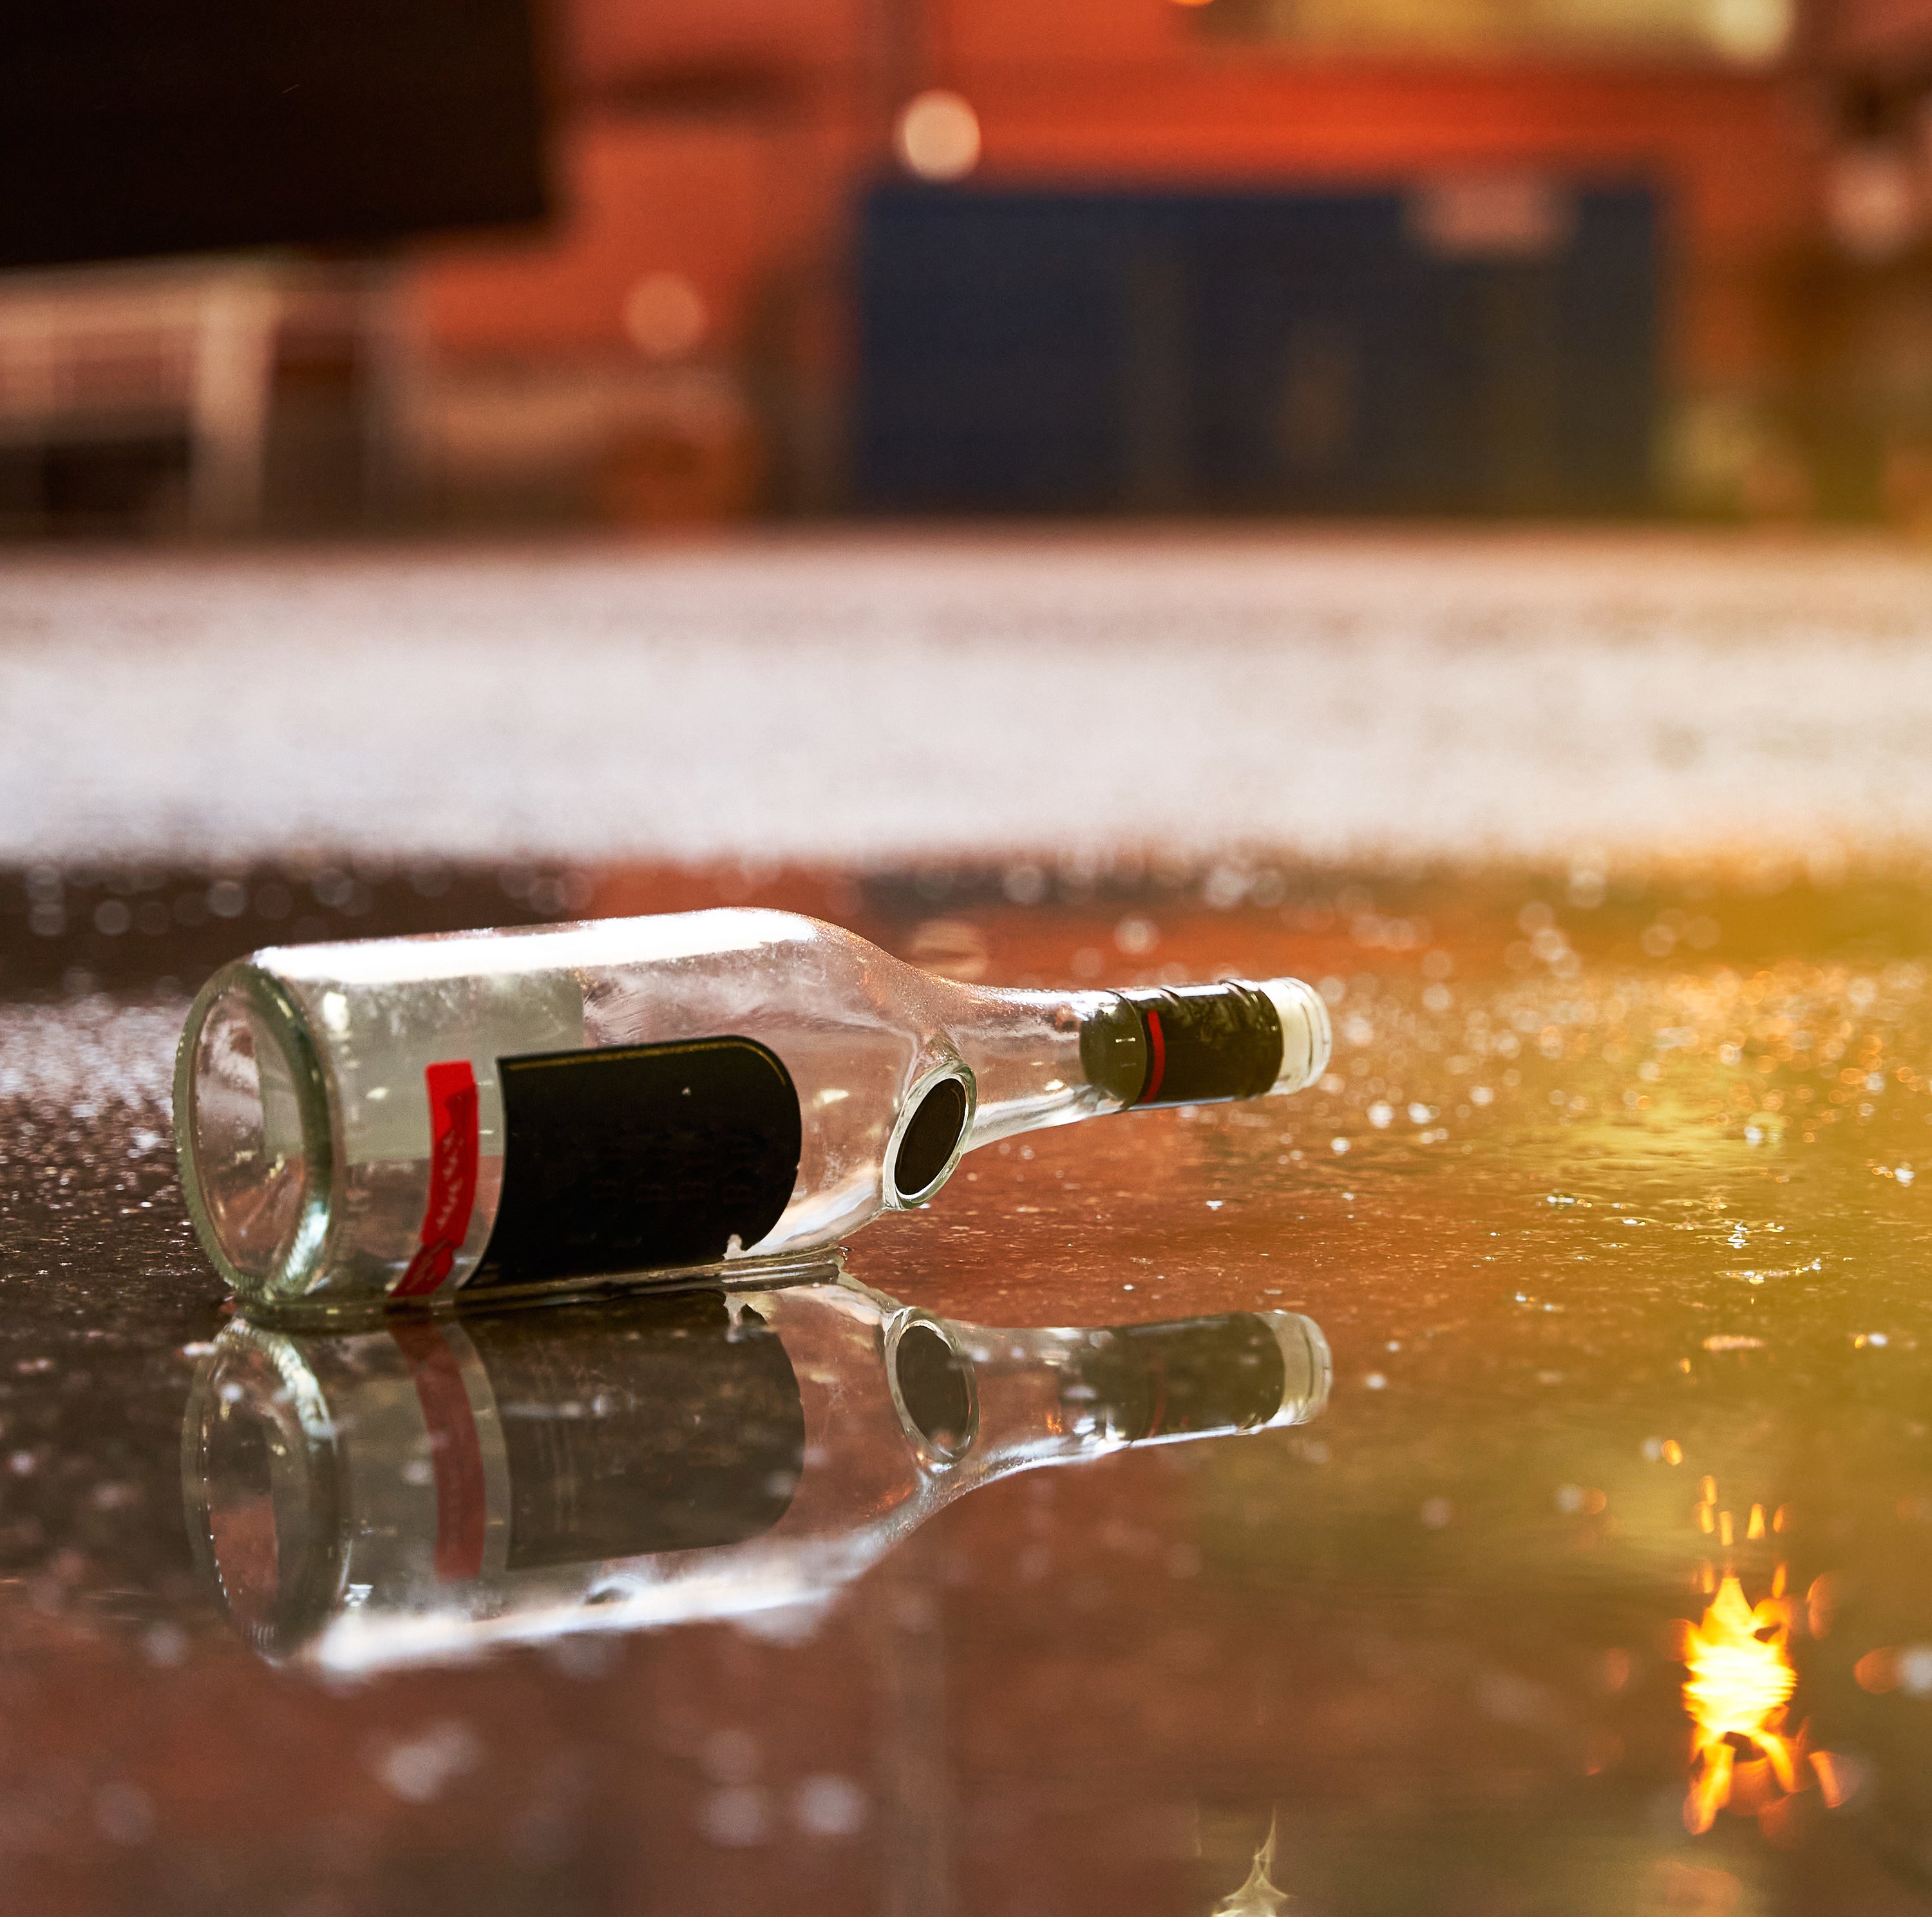 Garbage after-party in the street concept. Empty alcohol bottle on the floor at campus during sunset